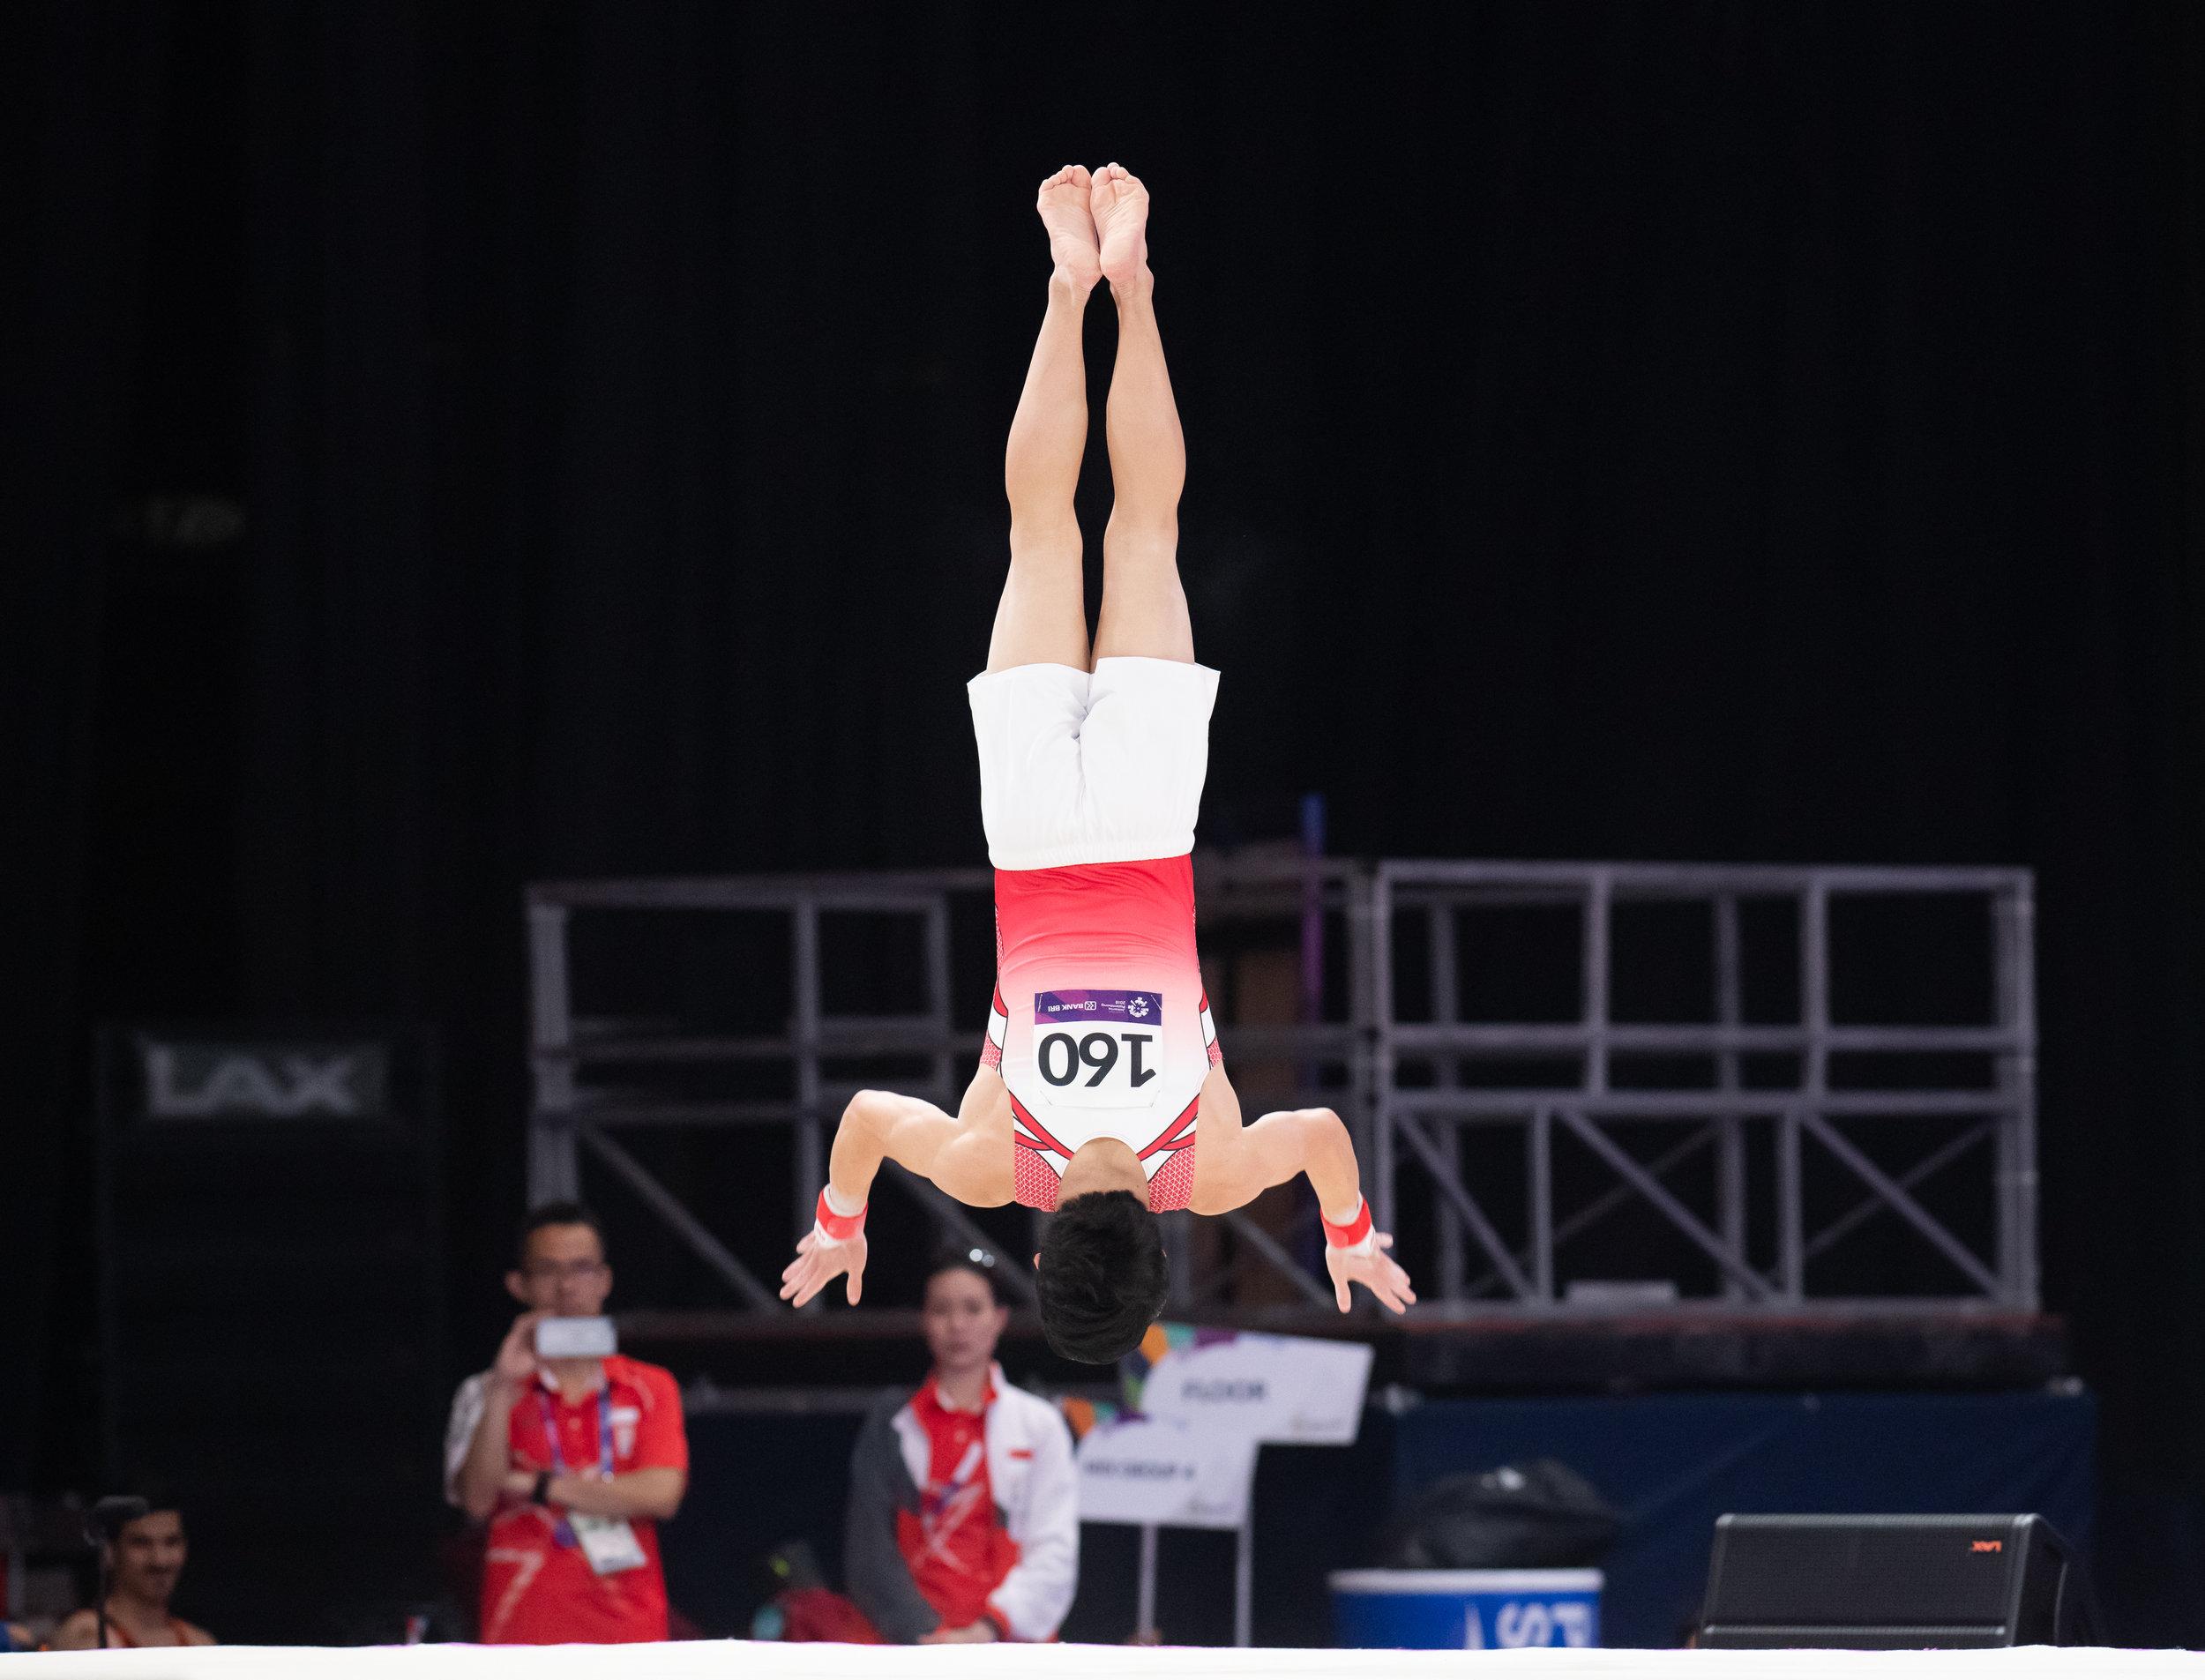 A Singaporean gymnast during the Men's Artistic Gymnastics Qualifiers of the Asian Games at the Jakarta Convention Centre.